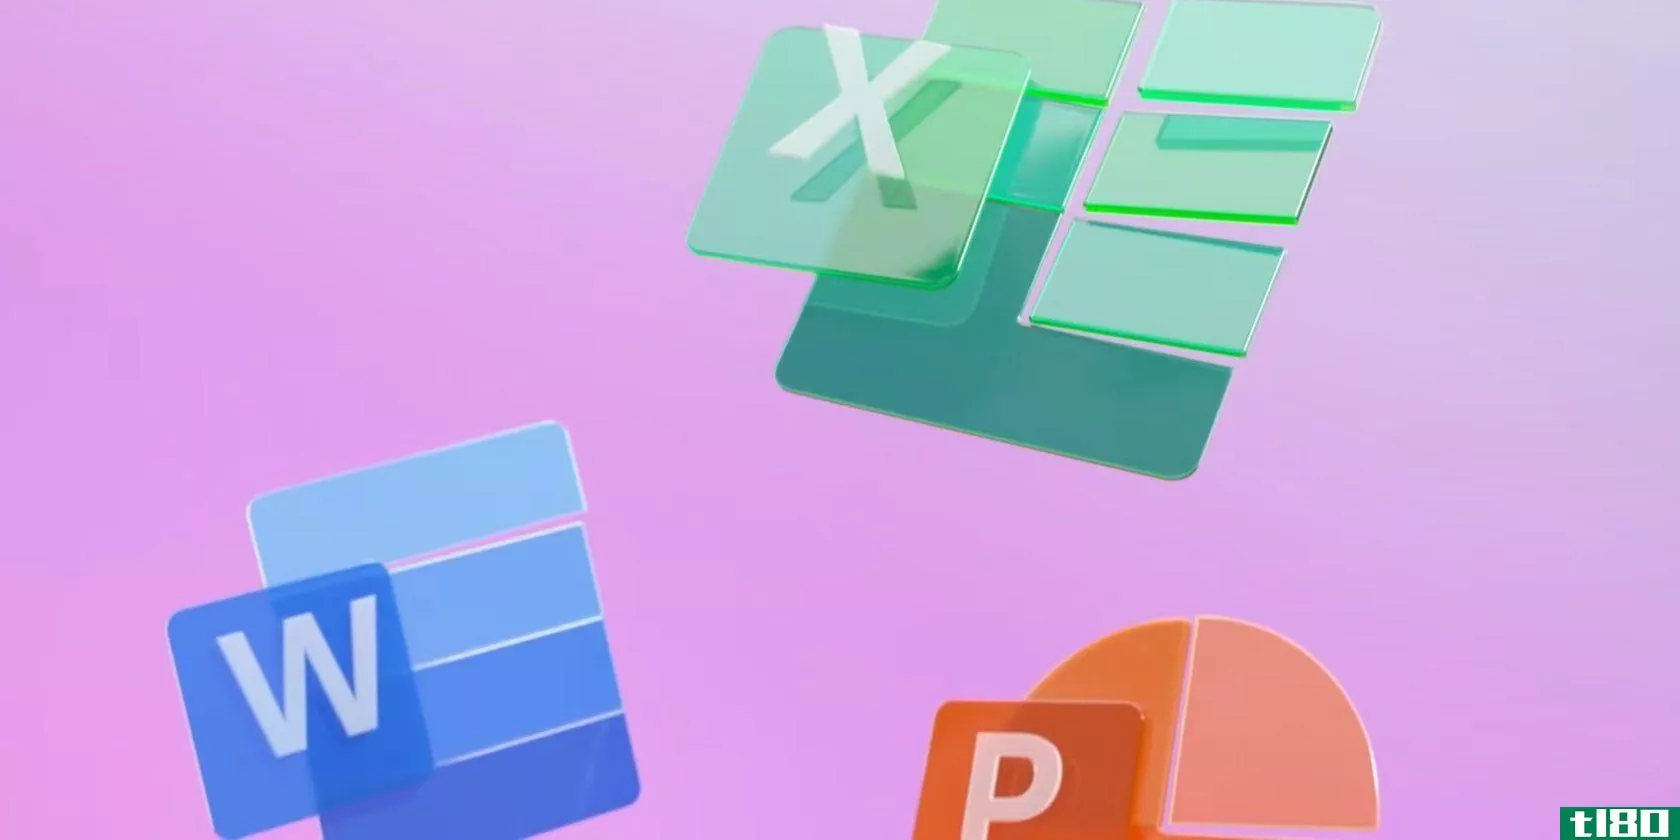 A still from Microsoft's add for the new mobile Office app for iOS and Android showing the ic*** for Excel, Word and PowerPoint